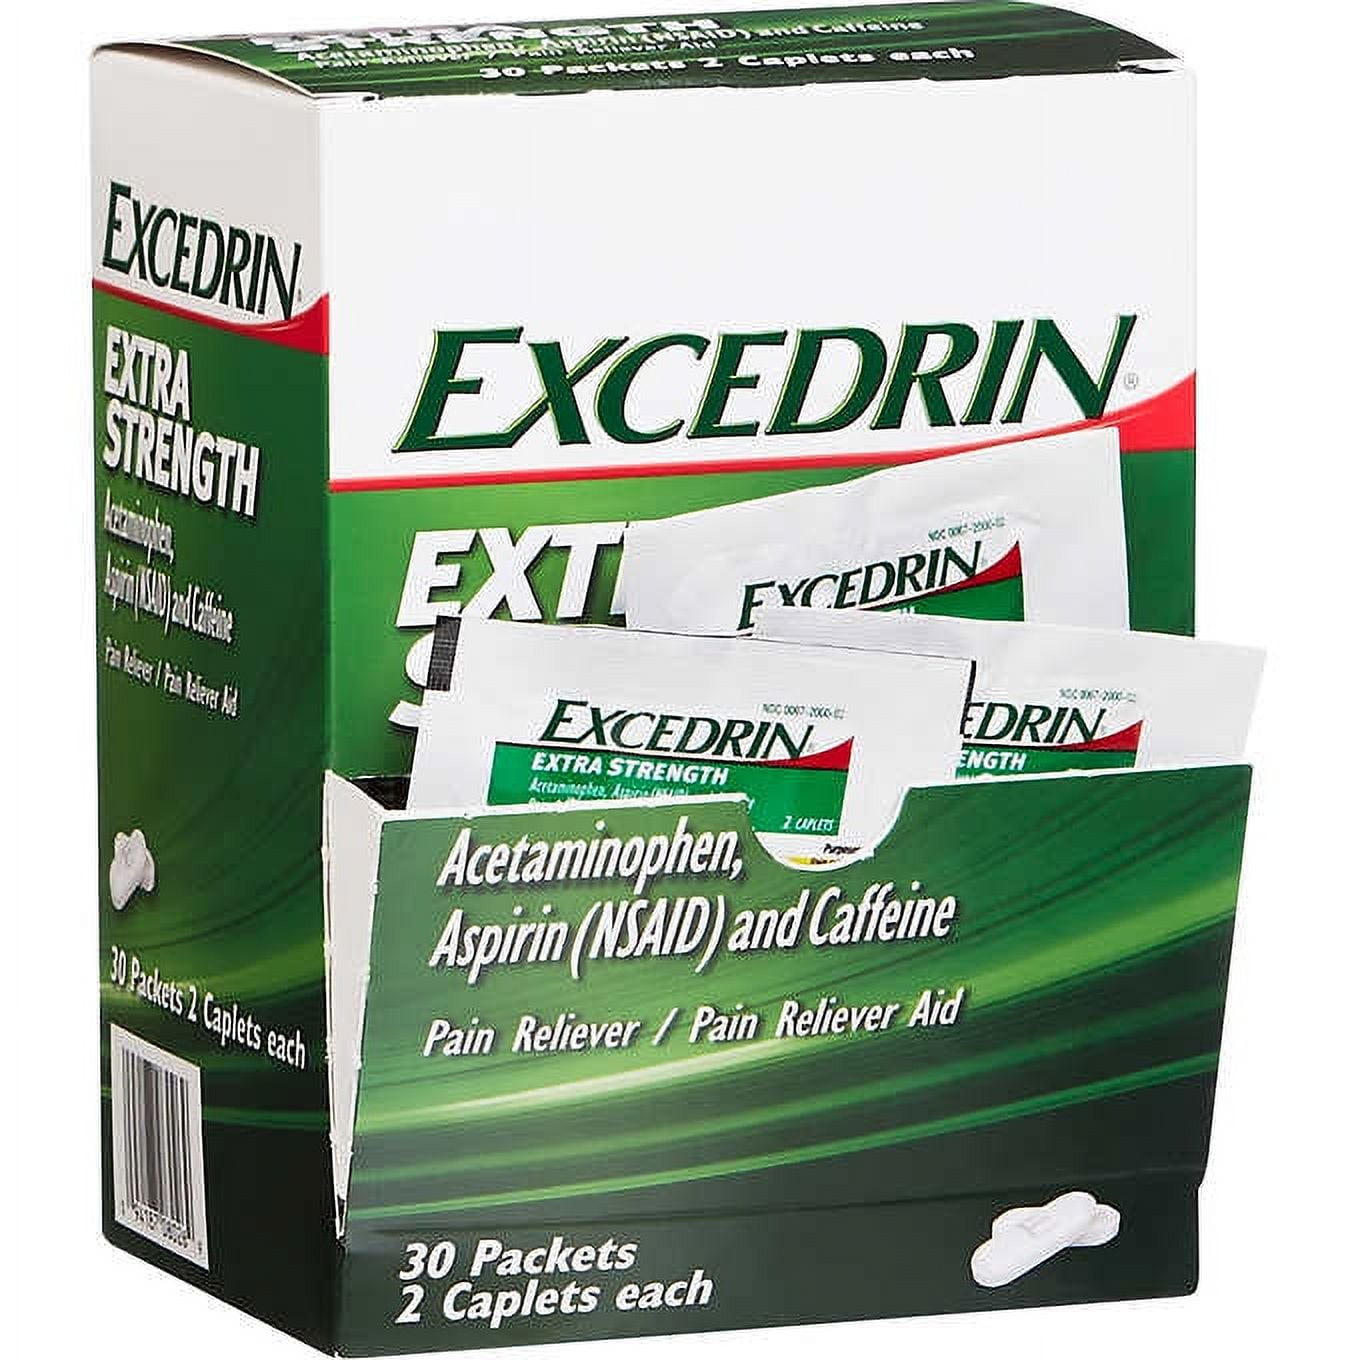 Excedrin Extra Strength 30 Packets 2 Caplets 60 Caplets